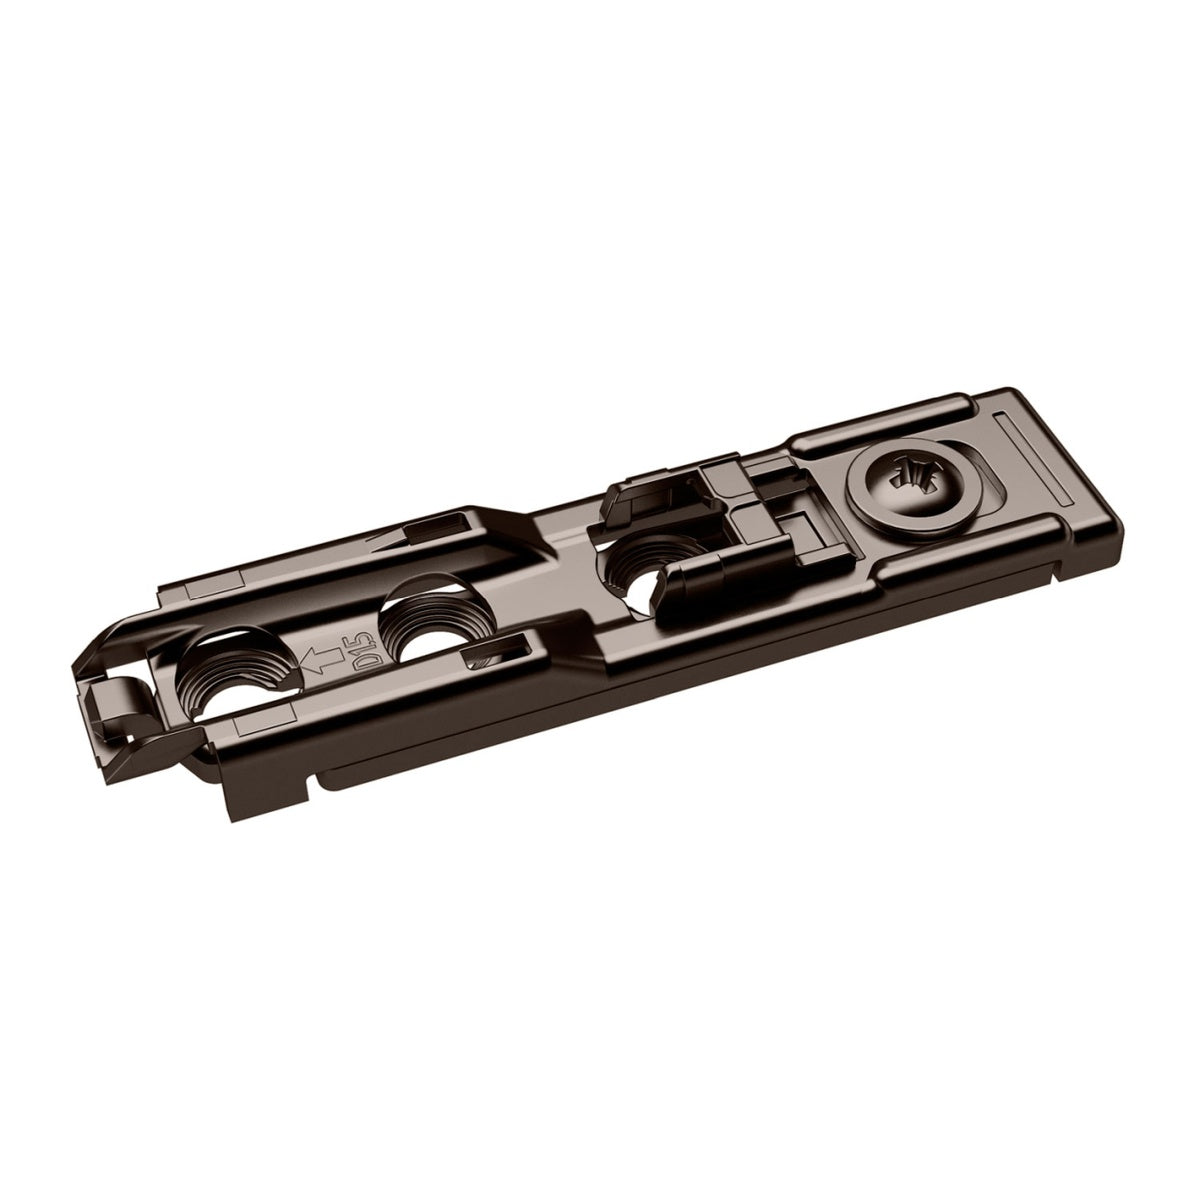 Hettich Linear mounting plate with Direct height adjustment obsidian black